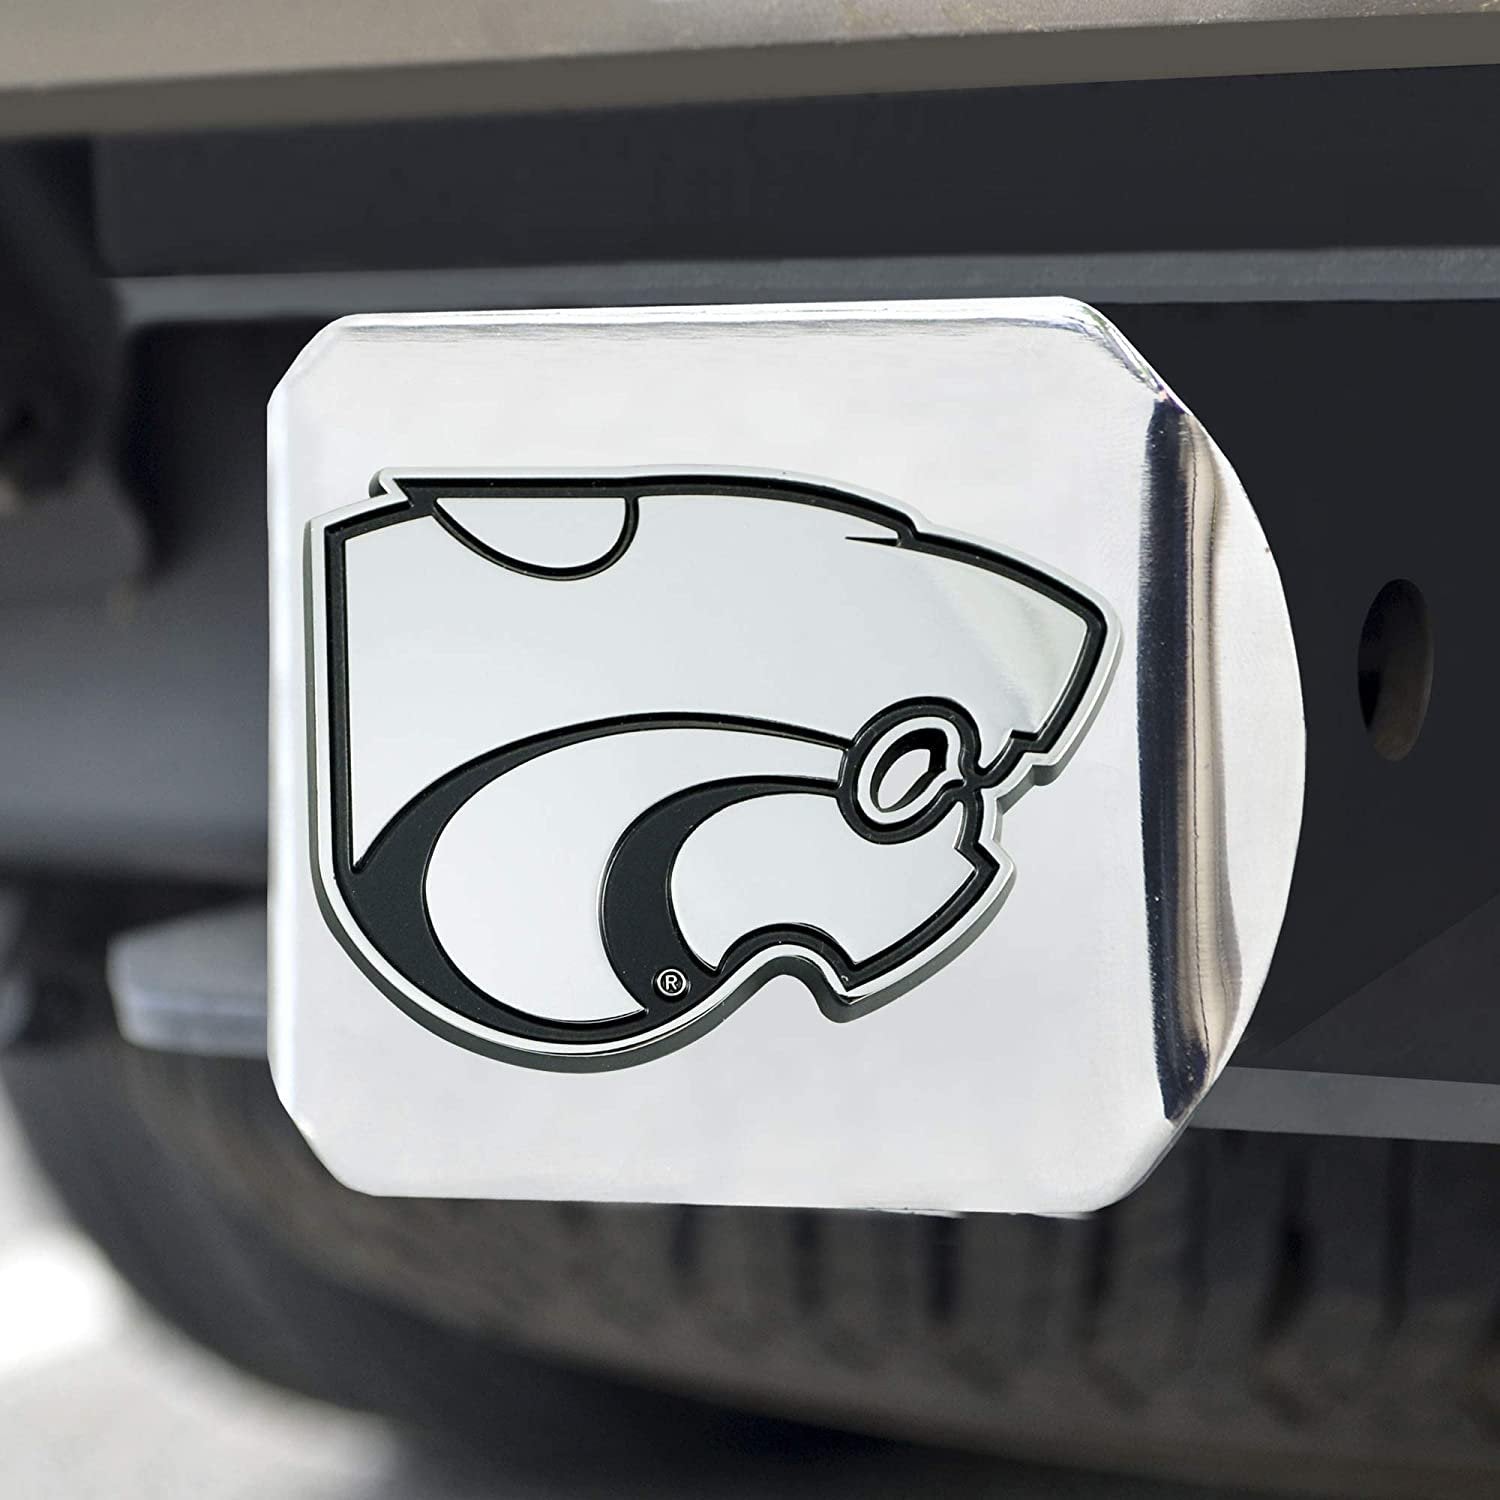 Kansas State Wildcats Hitch Cover Solid Metal with Raised Chrome Metal Emblem 2" Square Type III University